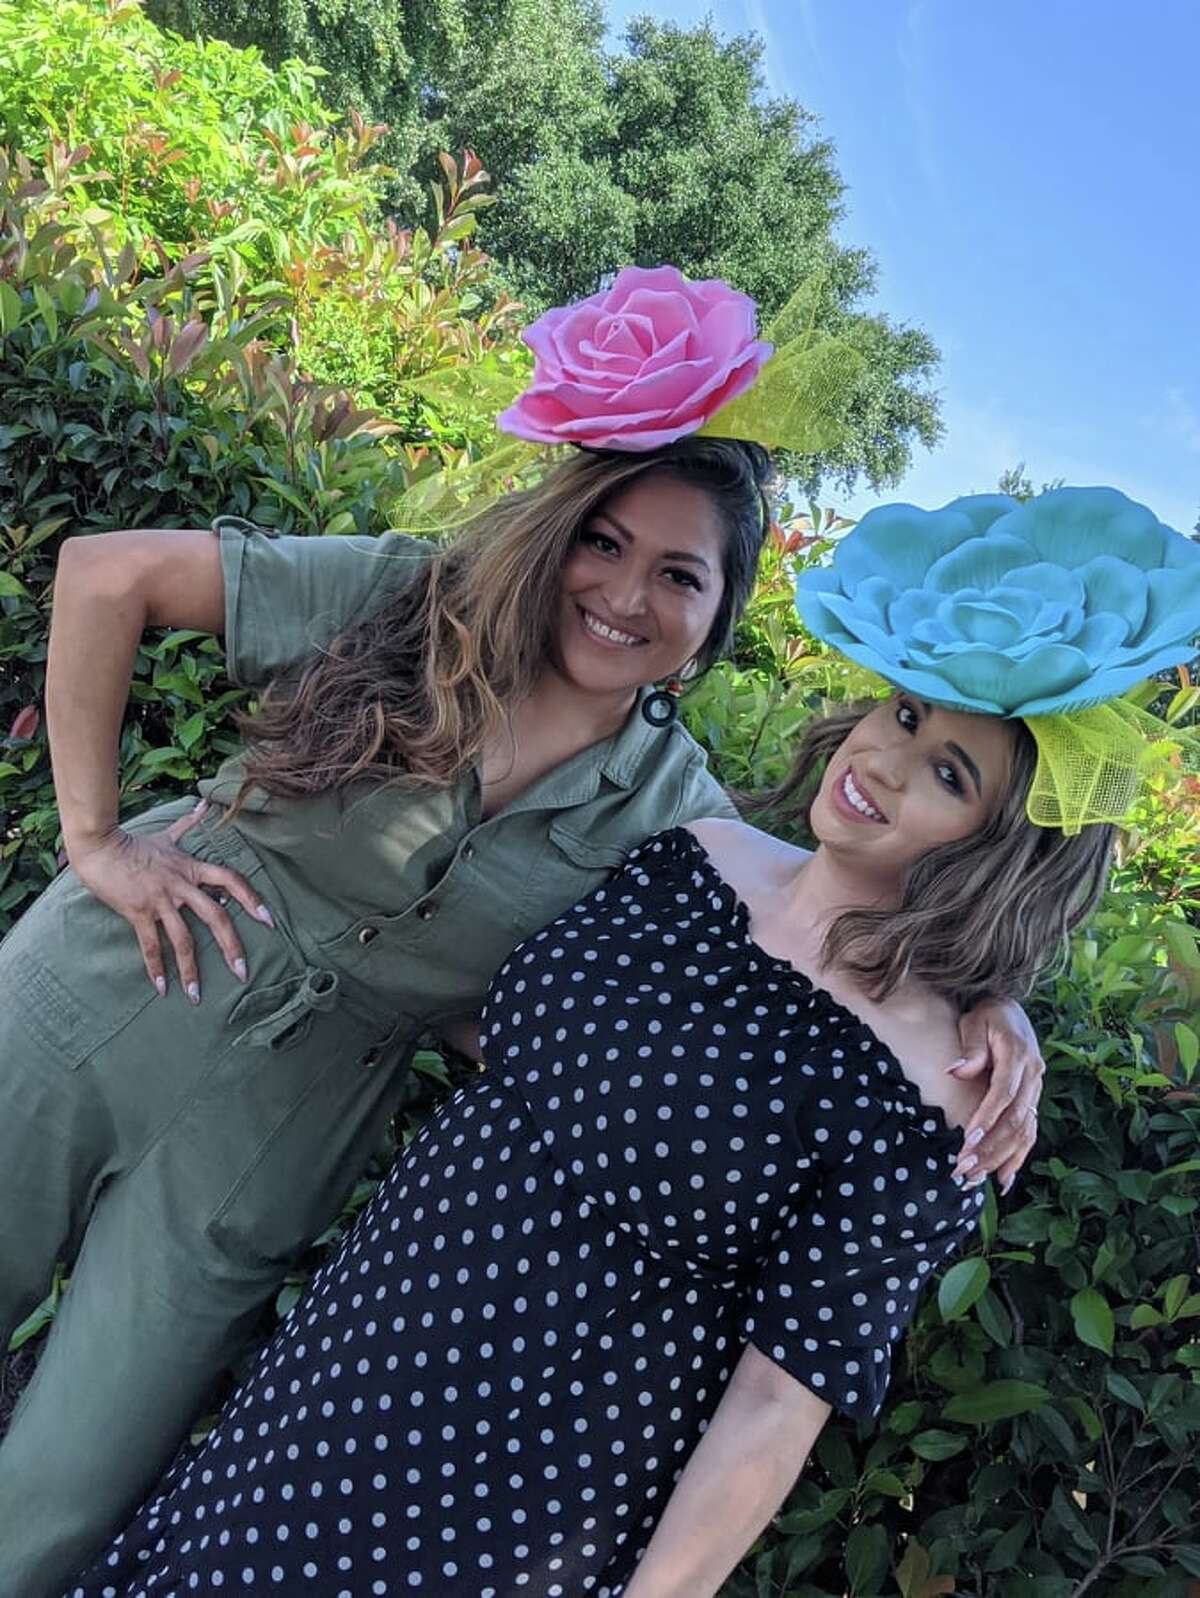 Gina Jaramillo, who owns Happy Chick Beauty Designs, is selling headpieces that are sure to stand out in the Fiesta crowds. Rather than wearing many small flowers on your head, Jaramillo's fascinator-style product lets Fiesta fans shuffle through the party with an oversized rose attached to their head. 